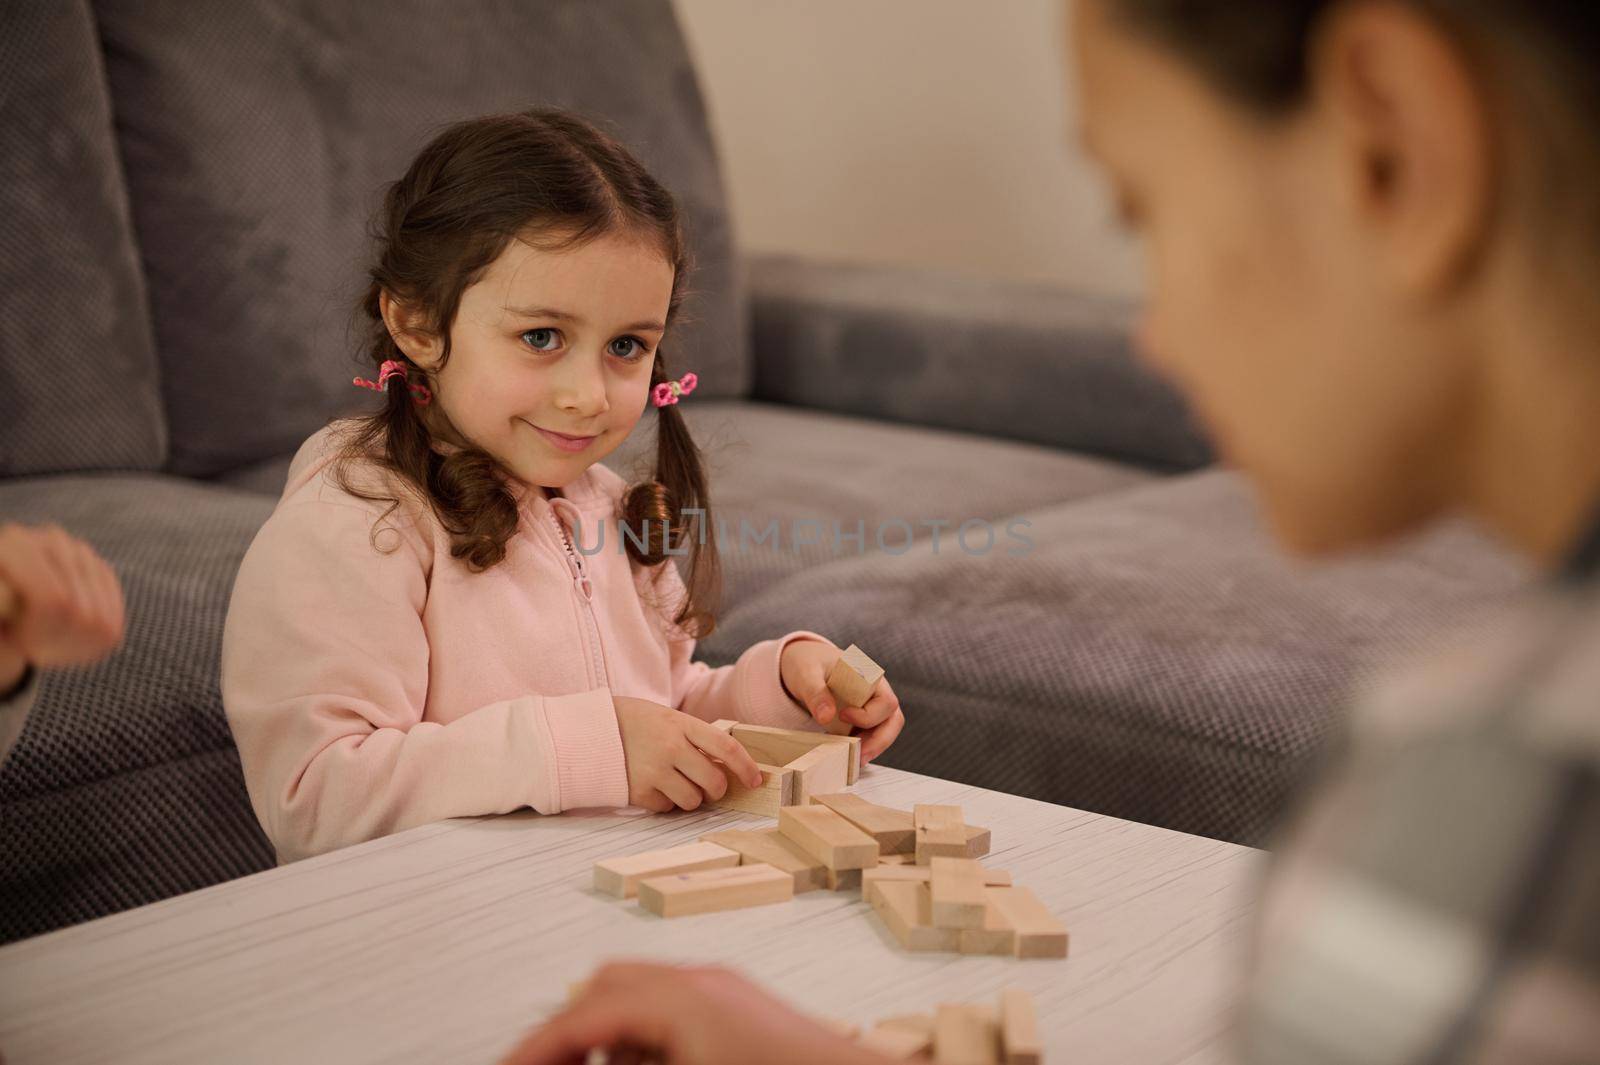 Adorable little girl in pink sweatshirt plays board game, builds wooden construction with blocks, smiles looking at her mom. Family pastime, educational leisure, fine motor skills development concept